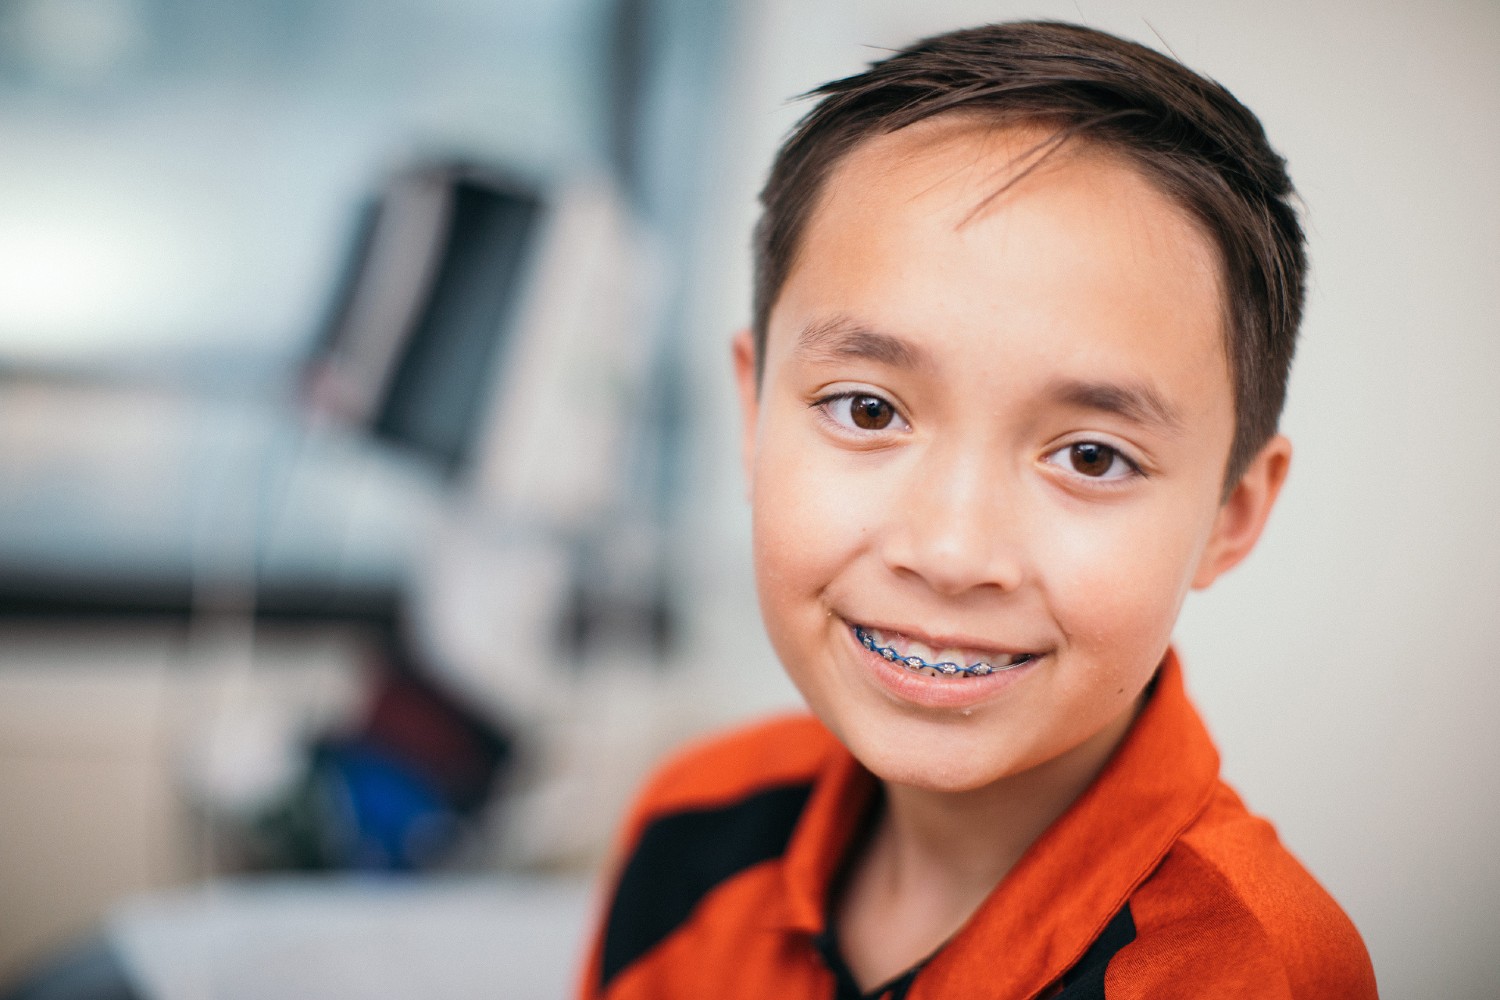 Boy With Braces Smiling in Exam Room